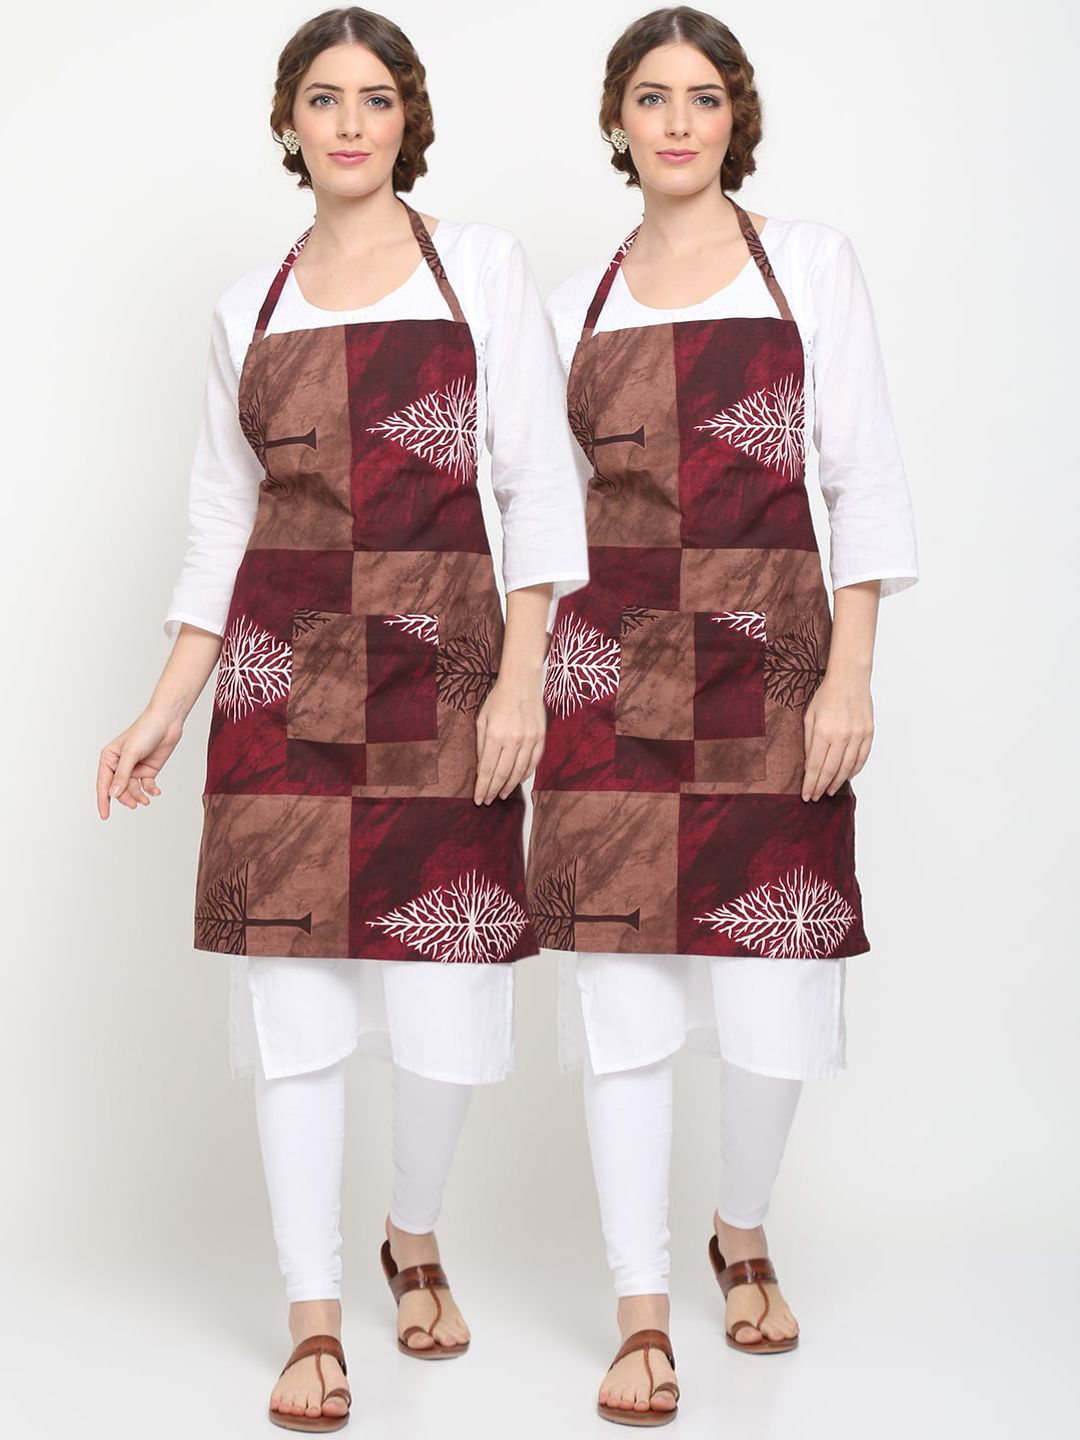 TAG 7 Pack of 2 Unisex Brown & Maroon Printed Aprons with Pockets Price in India